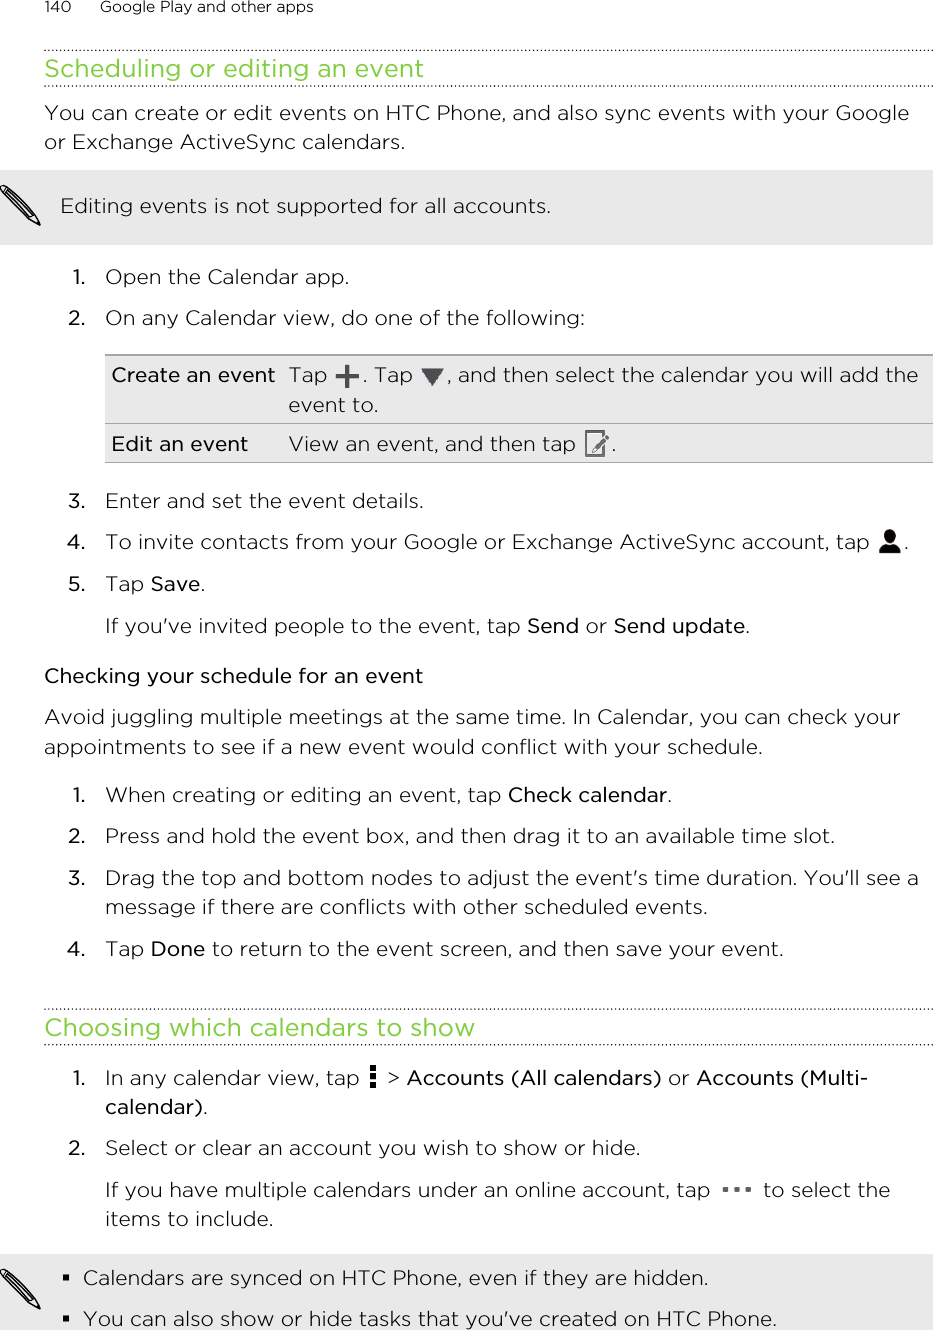 Scheduling or editing an eventYou can create or edit events on HTC Phone, and also sync events with your Googleor Exchange ActiveSync calendars.Editing events is not supported for all accounts.1. Open the Calendar app.2. On any Calendar view, do one of the following:Create an event Tap  . Tap  , and then select the calendar you will add theevent to.Edit an event View an event, and then tap  .3. Enter and set the event details.4. To invite contacts from your Google or Exchange ActiveSync account, tap  .5. Tap Save. If you&apos;ve invited people to the event, tap Send or Send update.Checking your schedule for an eventAvoid juggling multiple meetings at the same time. In Calendar, you can check yourappointments to see if a new event would conflict with your schedule.1. When creating or editing an event, tap Check calendar.2. Press and hold the event box, and then drag it to an available time slot.3. Drag the top and bottom nodes to adjust the event&apos;s time duration. You&apos;ll see amessage if there are conflicts with other scheduled events.4. Tap Done to return to the event screen, and then save your event.Choosing which calendars to show1. In any calendar view, tap   &gt; Accounts (All calendars) or Accounts (Multi-calendar).2. Select or clear an account you wish to show or hide. If you have multiple calendars under an online account, tap   to select theitems to include.§Calendars are synced on HTC Phone, even if they are hidden.§You can also show or hide tasks that you&apos;ve created on HTC Phone.140 Google Play and other appsHTC Confidential for Certification HTC Confidential for Certification 